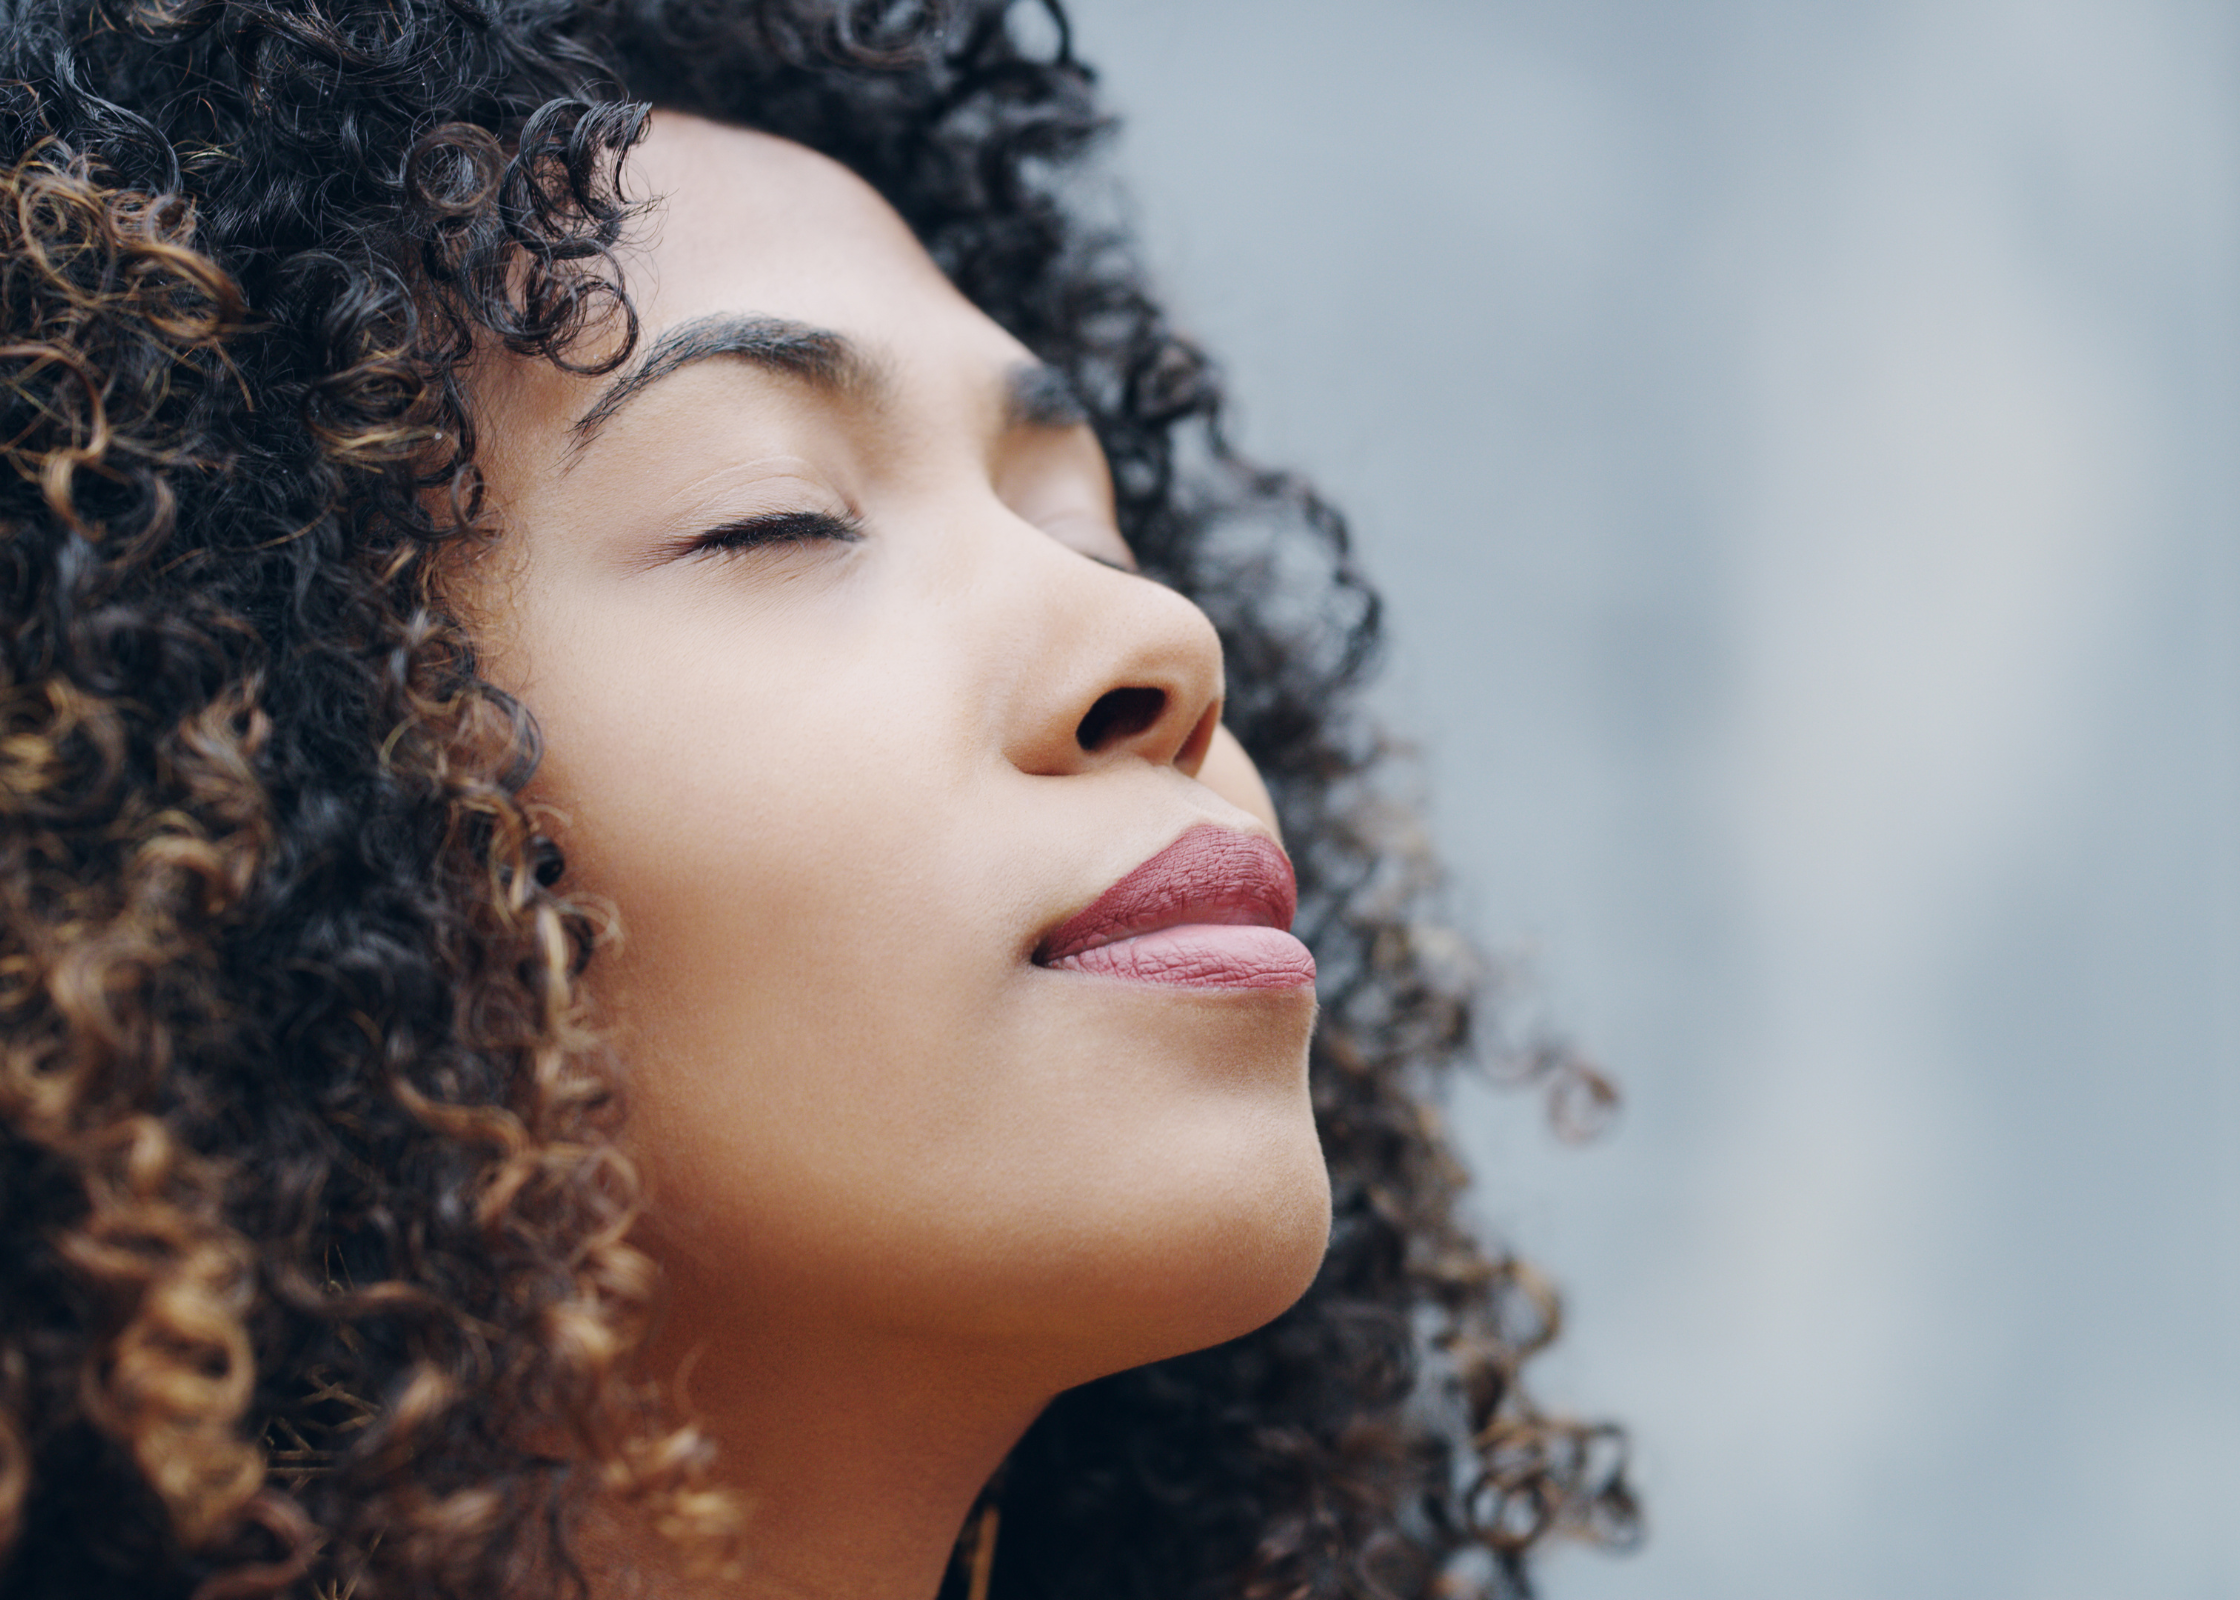 black woman breathing. Doing breathing exercises, deep breath work. relax after a long, hard, stressful day at work or at home. Ways to unwind and decompress after a busy day and relieve stress.